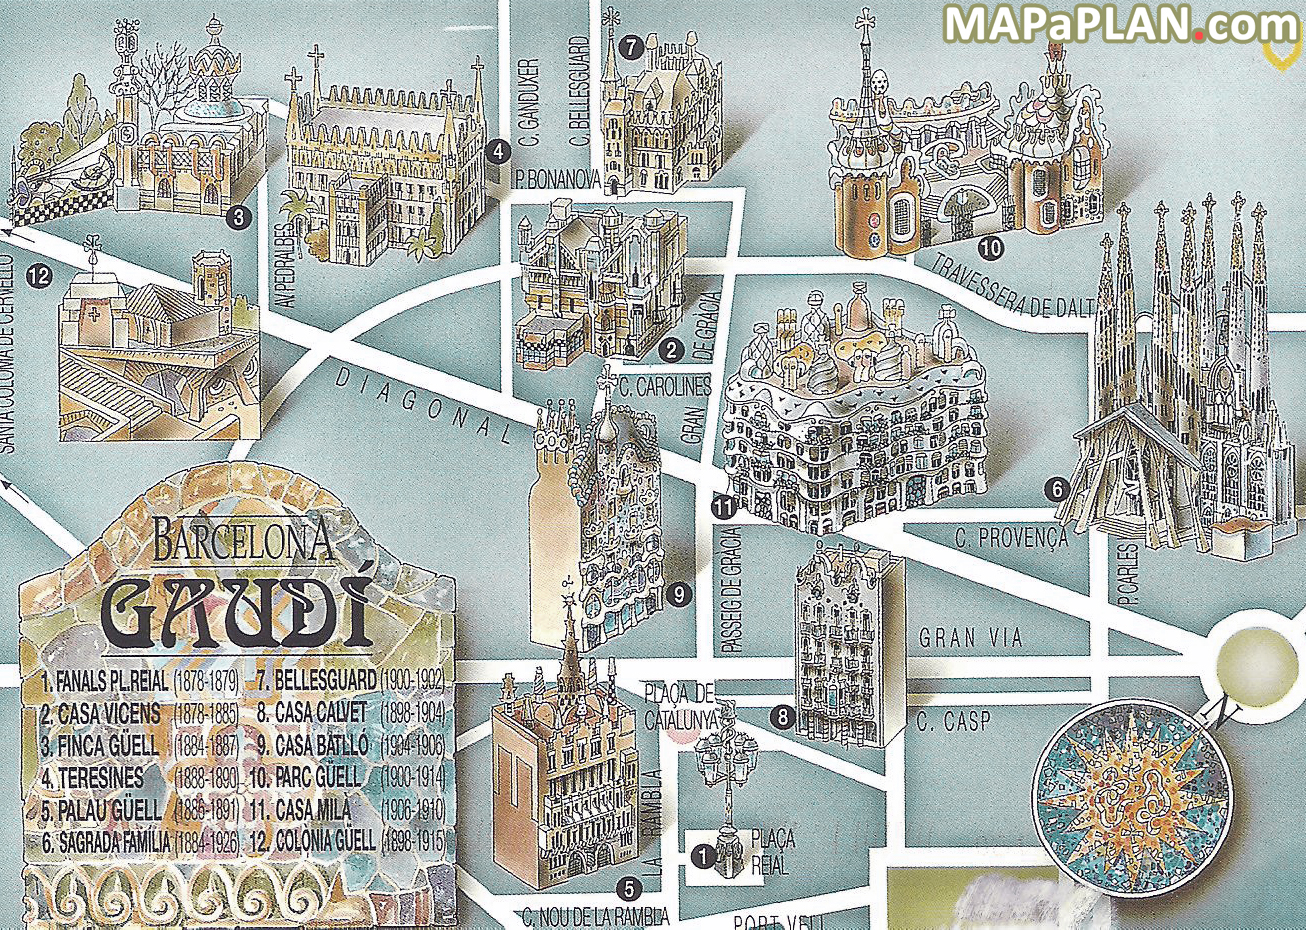 Gaudi birds eye aerial 3d main buildings location view Barcelona top tourist attractions map